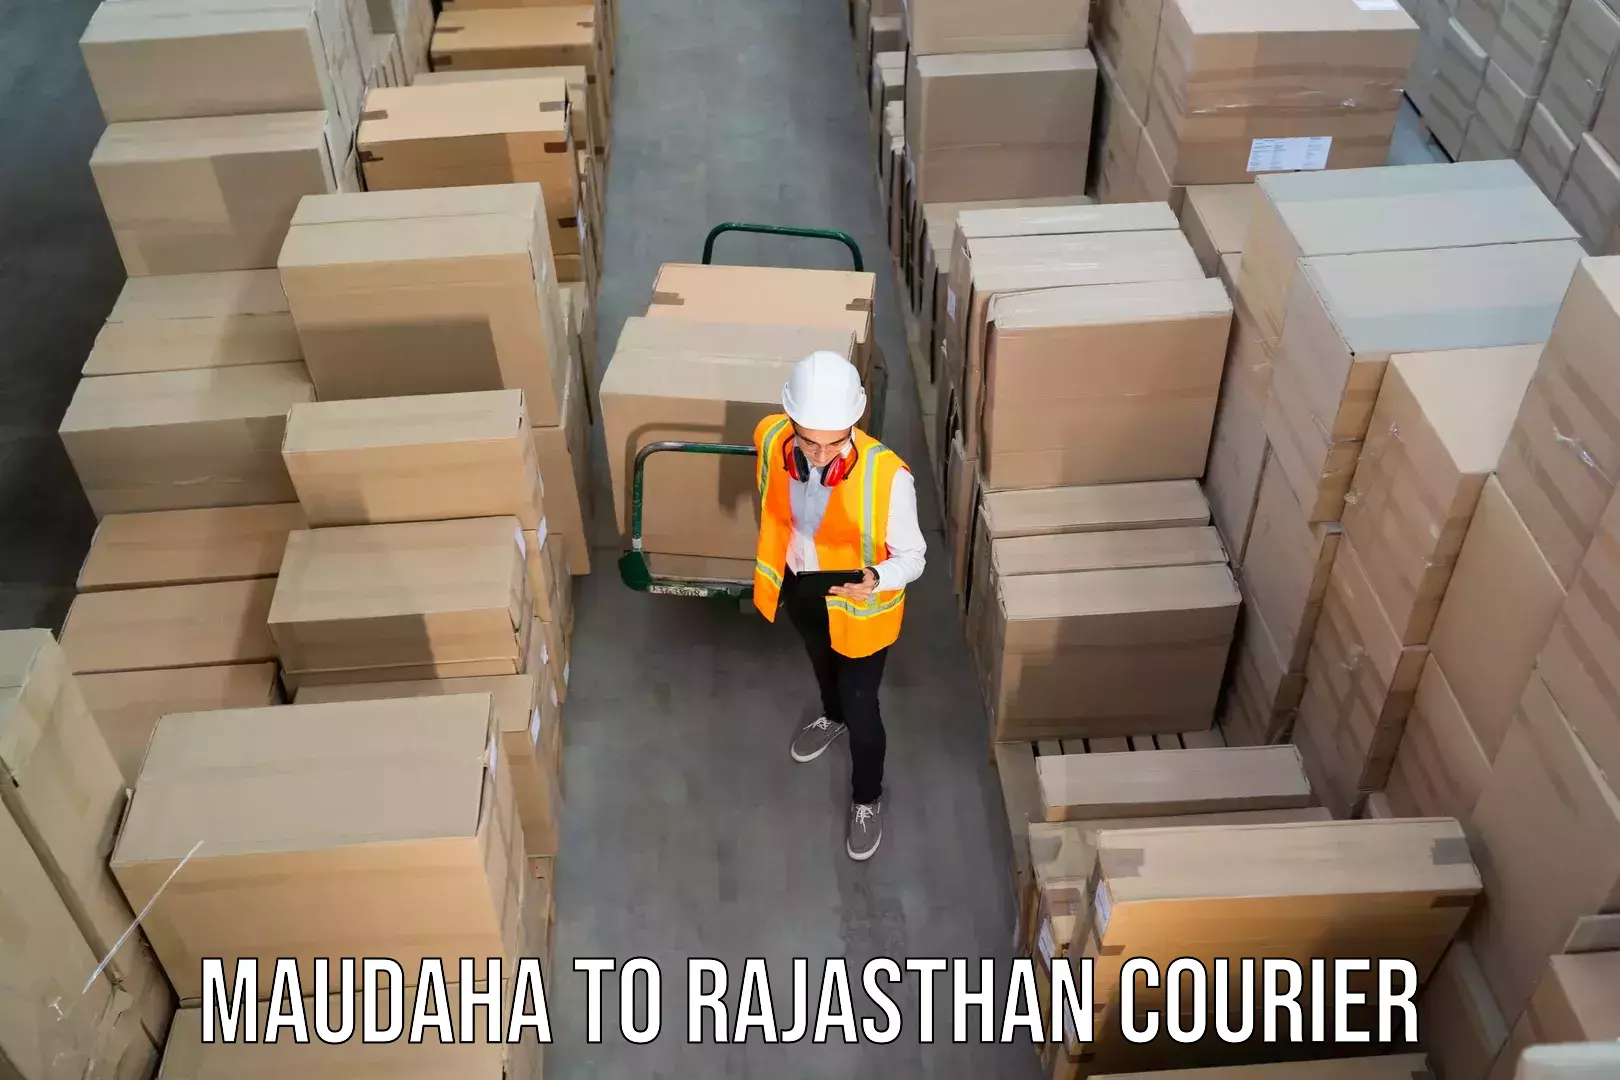 Multi-national courier services Maudaha to Udaipur